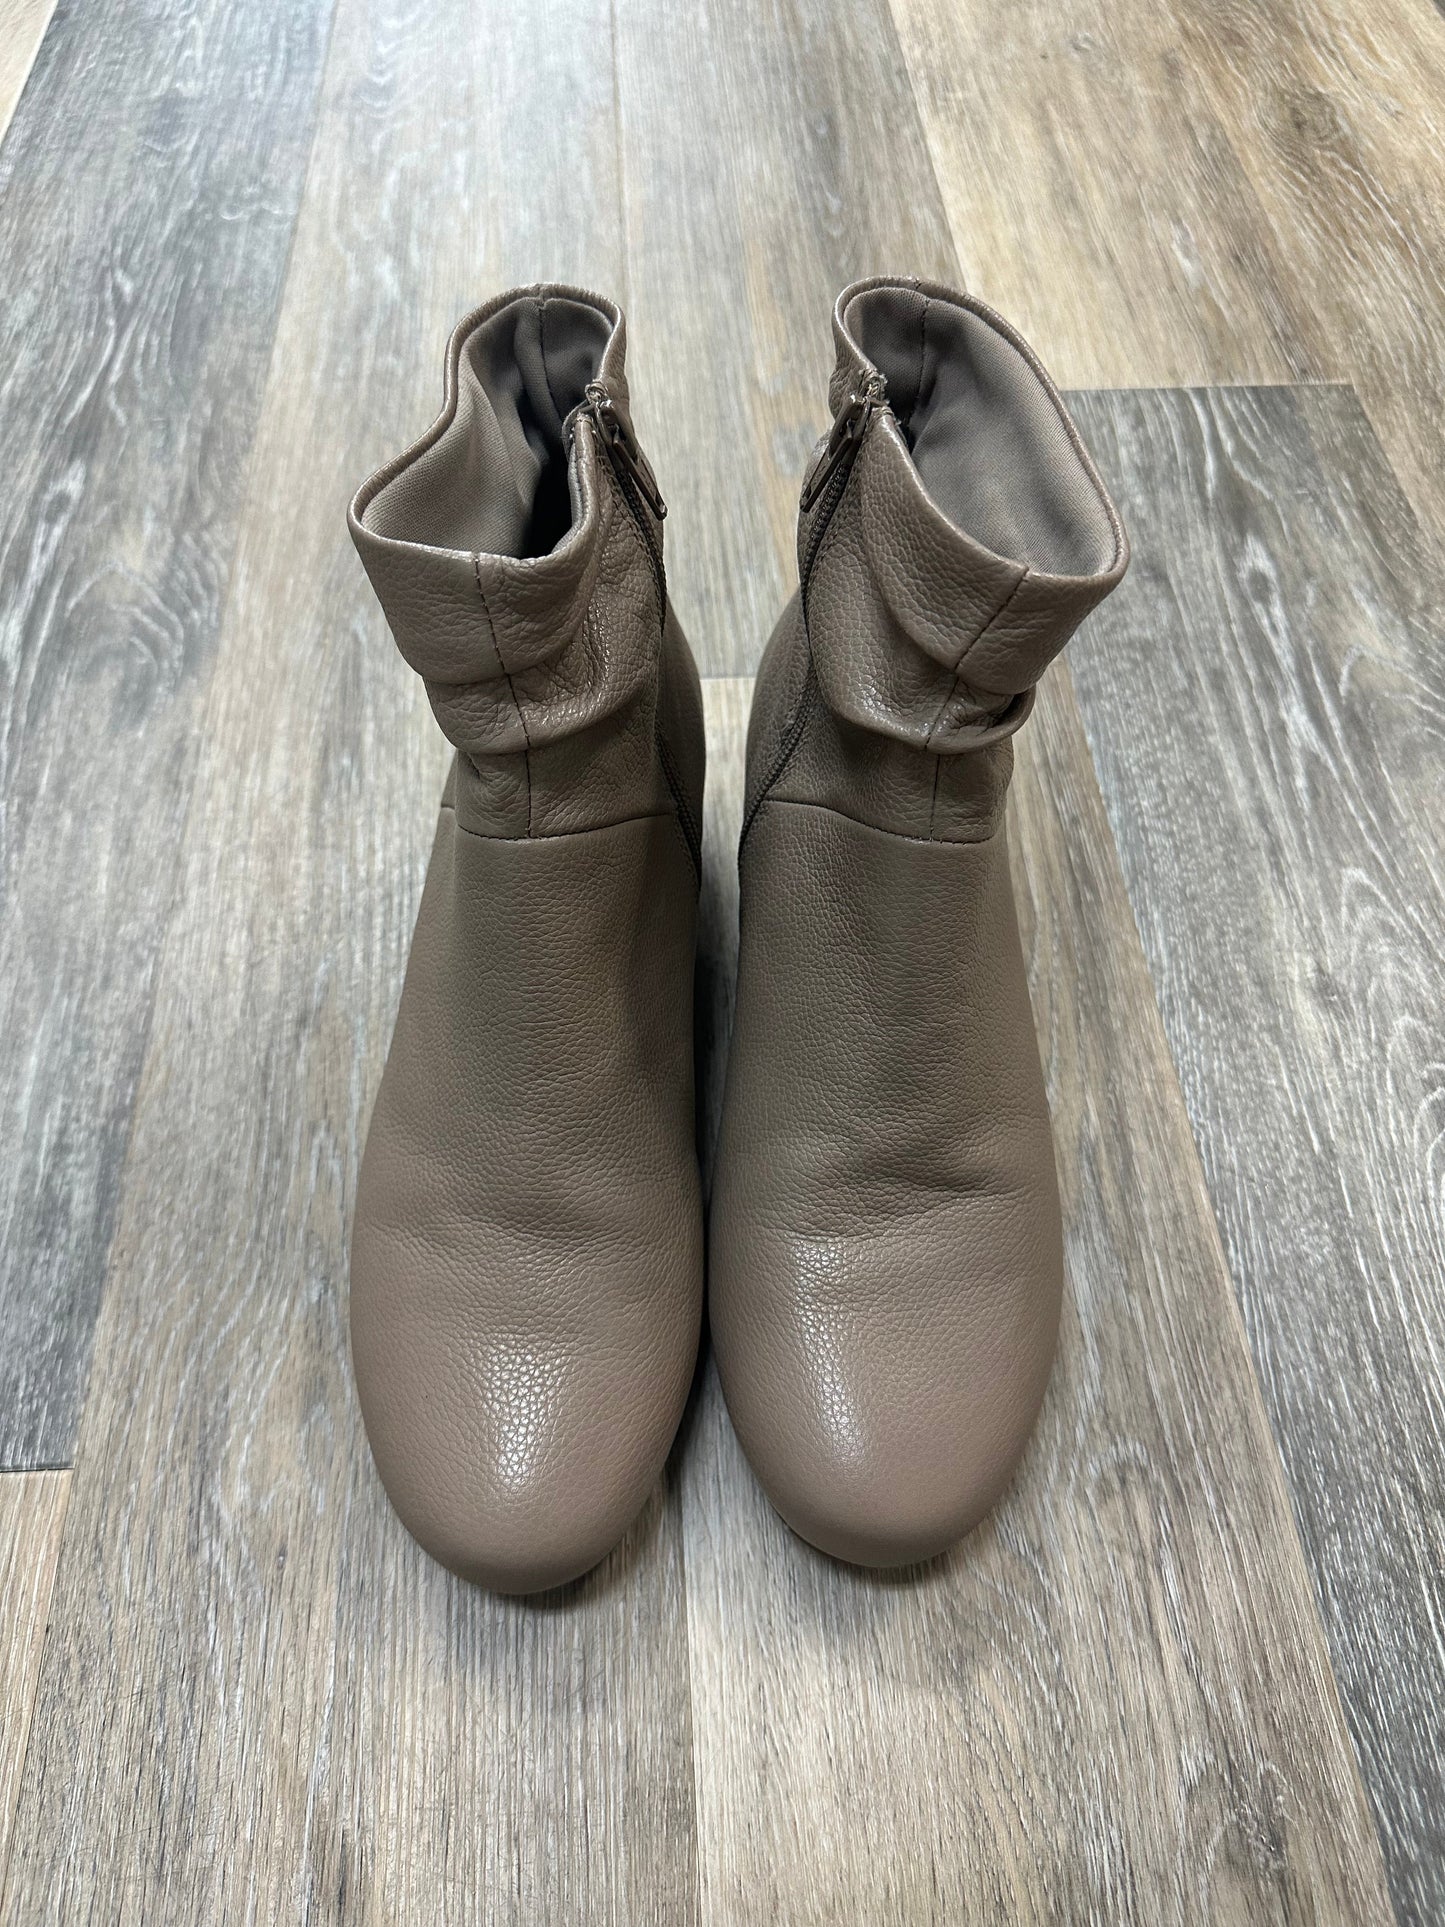 Brown Boots Ankle Heels Abeo, Size 9